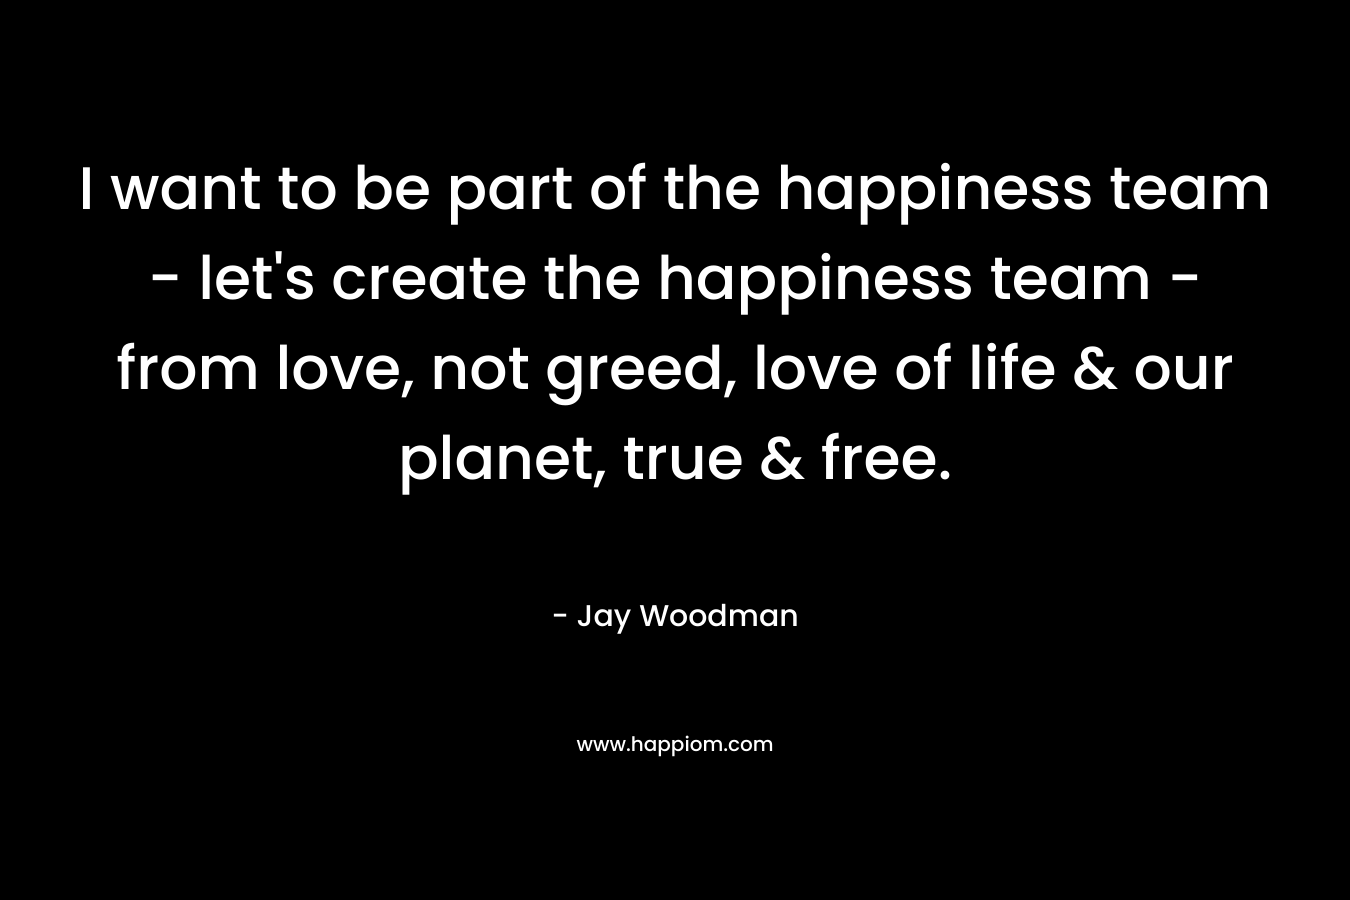 I want to be part of the happiness team - let's create the happiness team - from love, not greed, love of life & our planet, true & free.